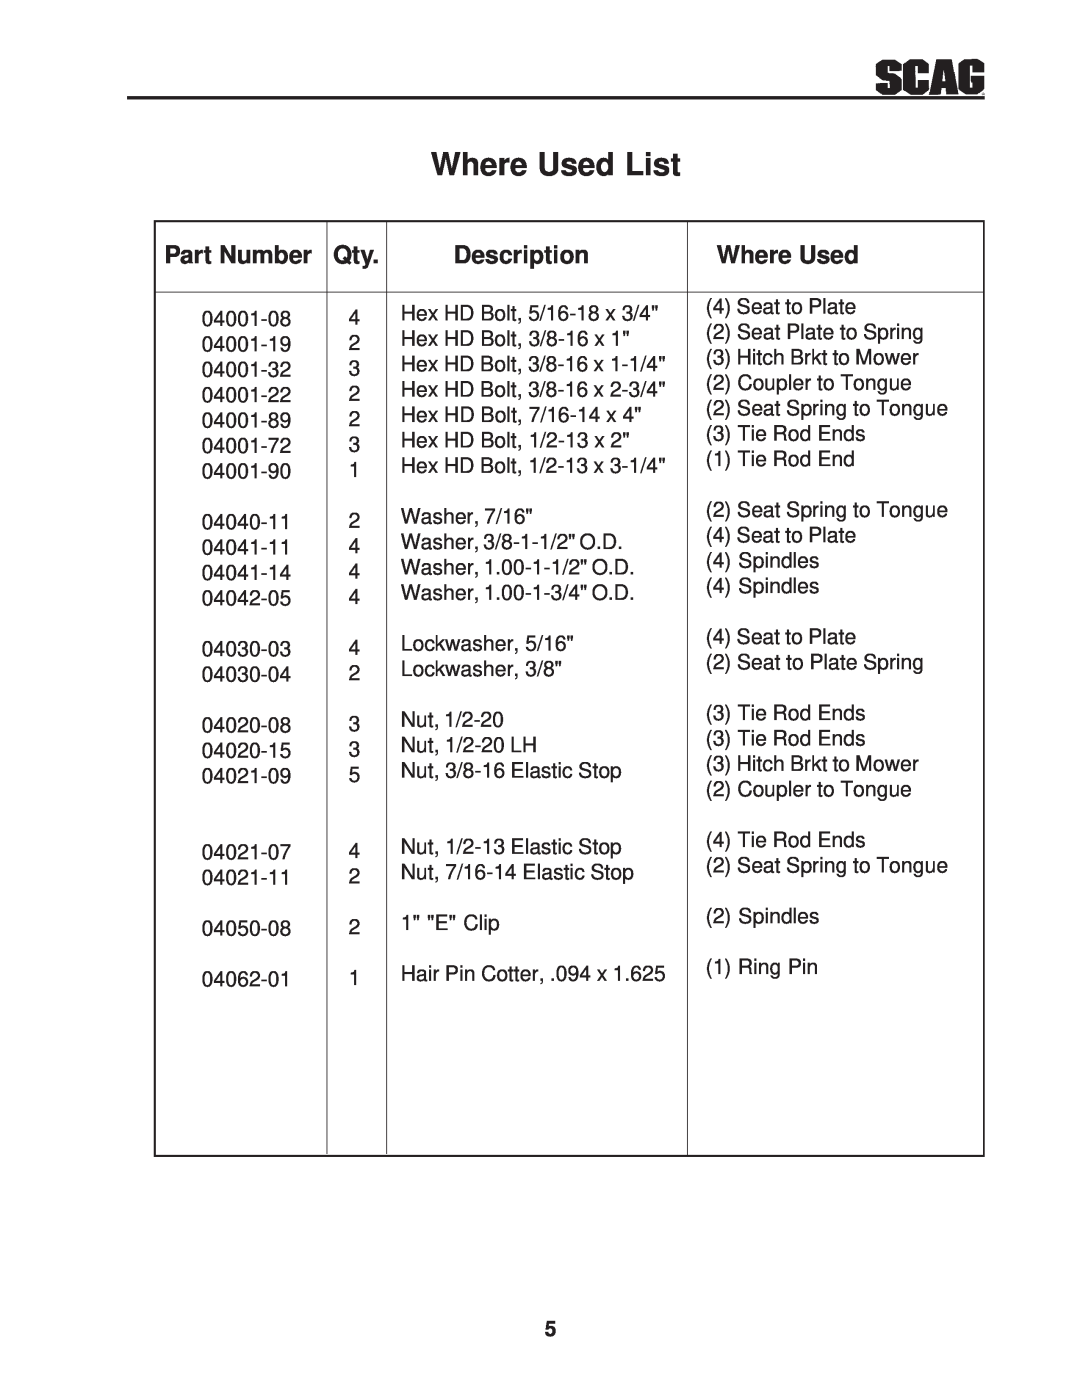 Scag Power Equipment RS-ZT manual Where Used List, Part Number, Description 